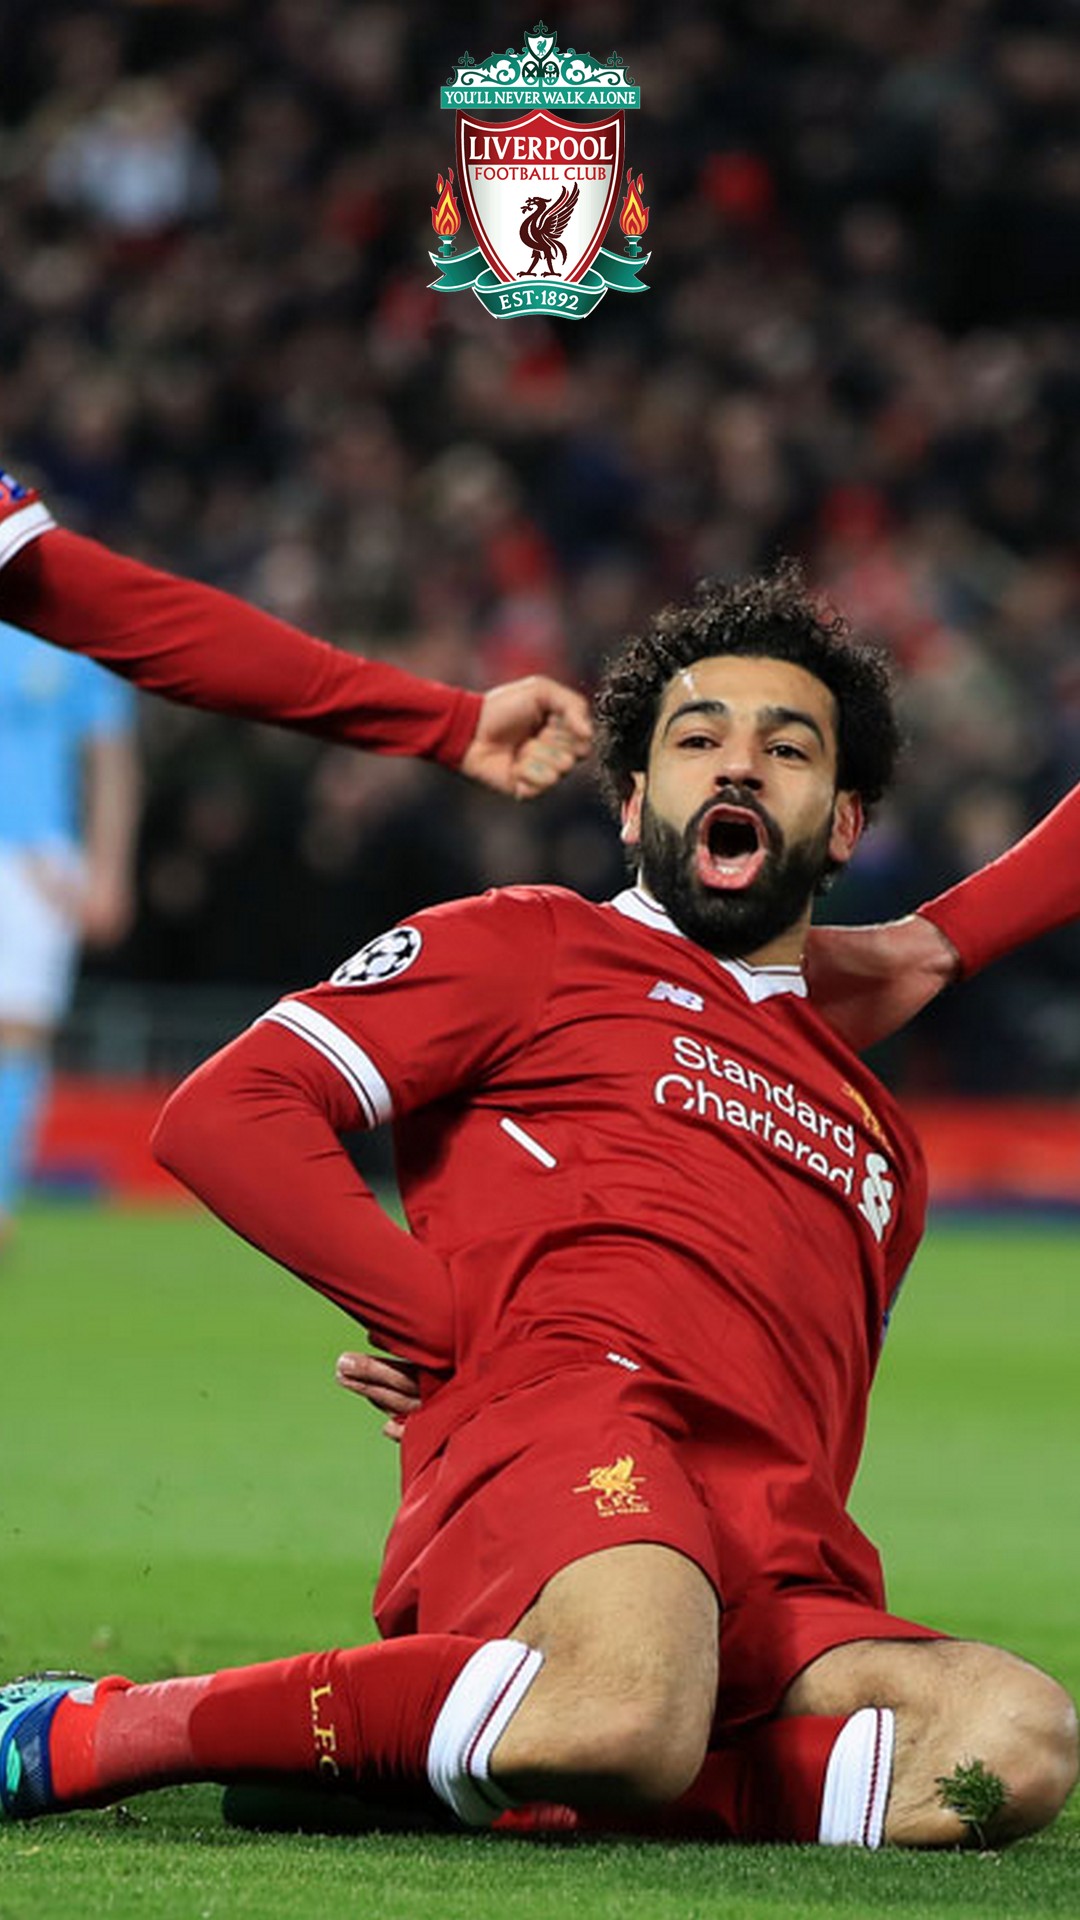 Mo Salah Wallpaper Android With Image Resolution Pixel - Liverpool Vs Man City Champions League 2018 - HD Wallpaper 